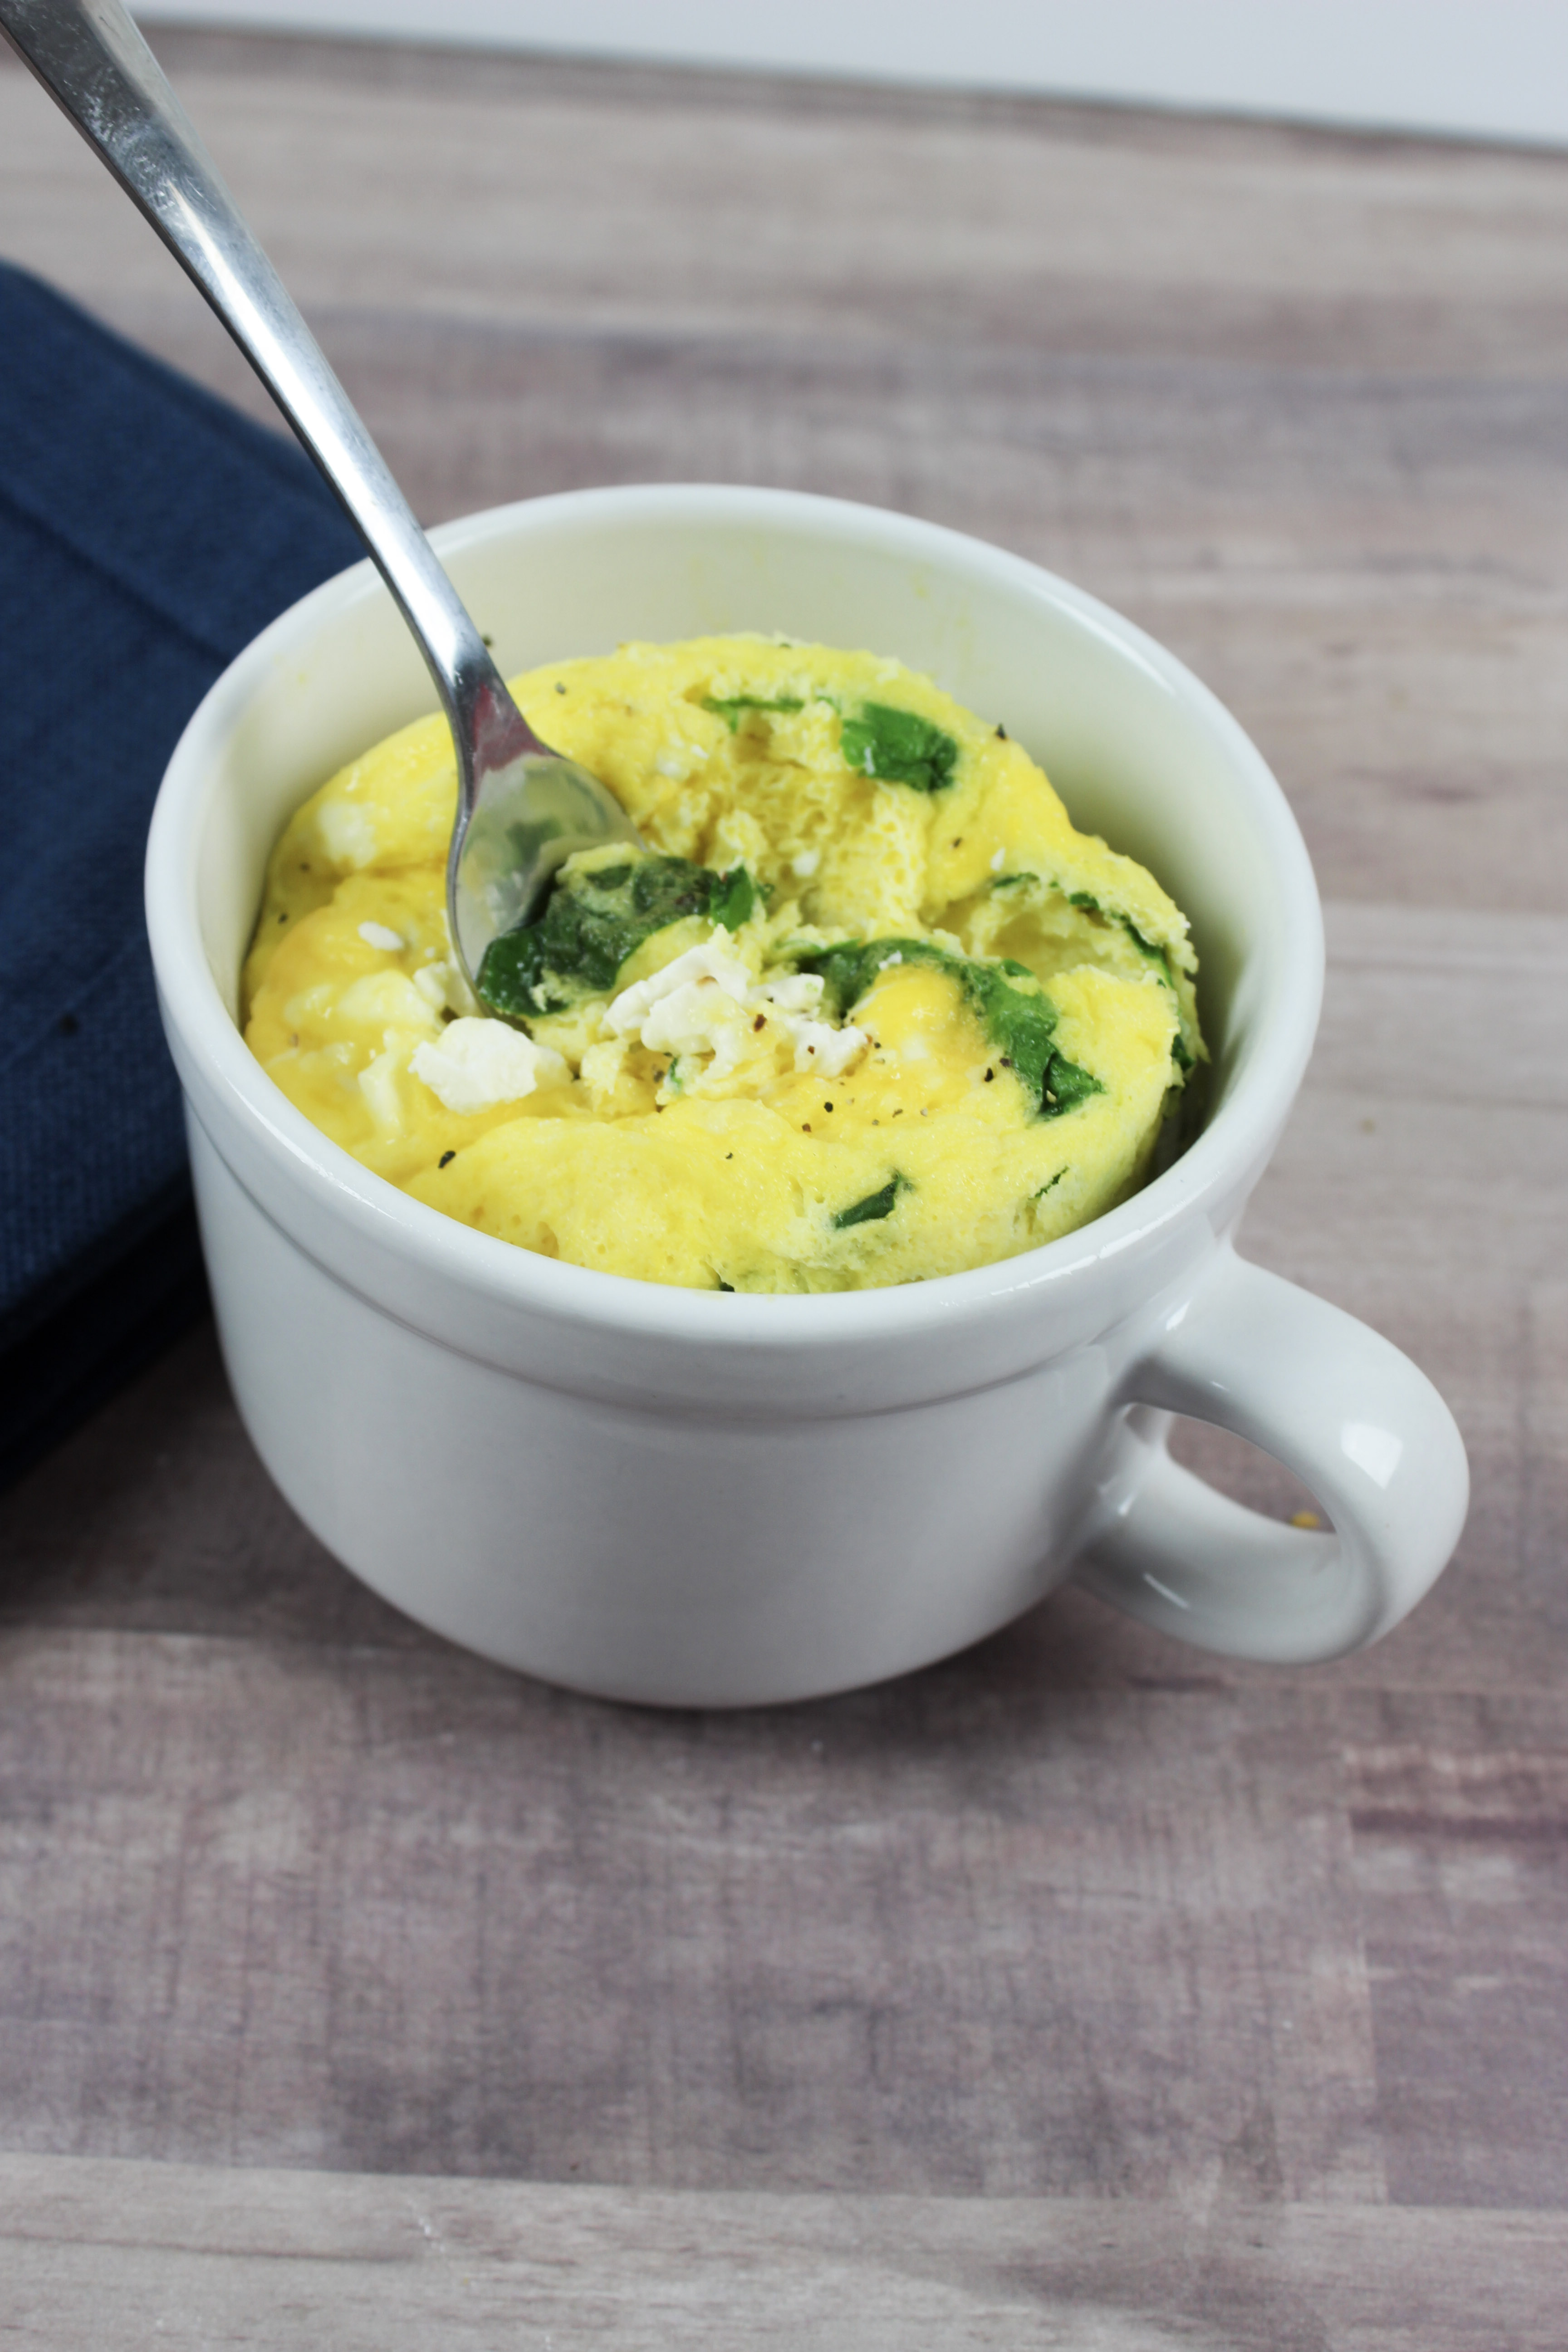 Breakfast is very important. Mornings are hard when you are short on time. Omelette in a mug is a quick breakfast idea. Spinach & feta omelette in a mug